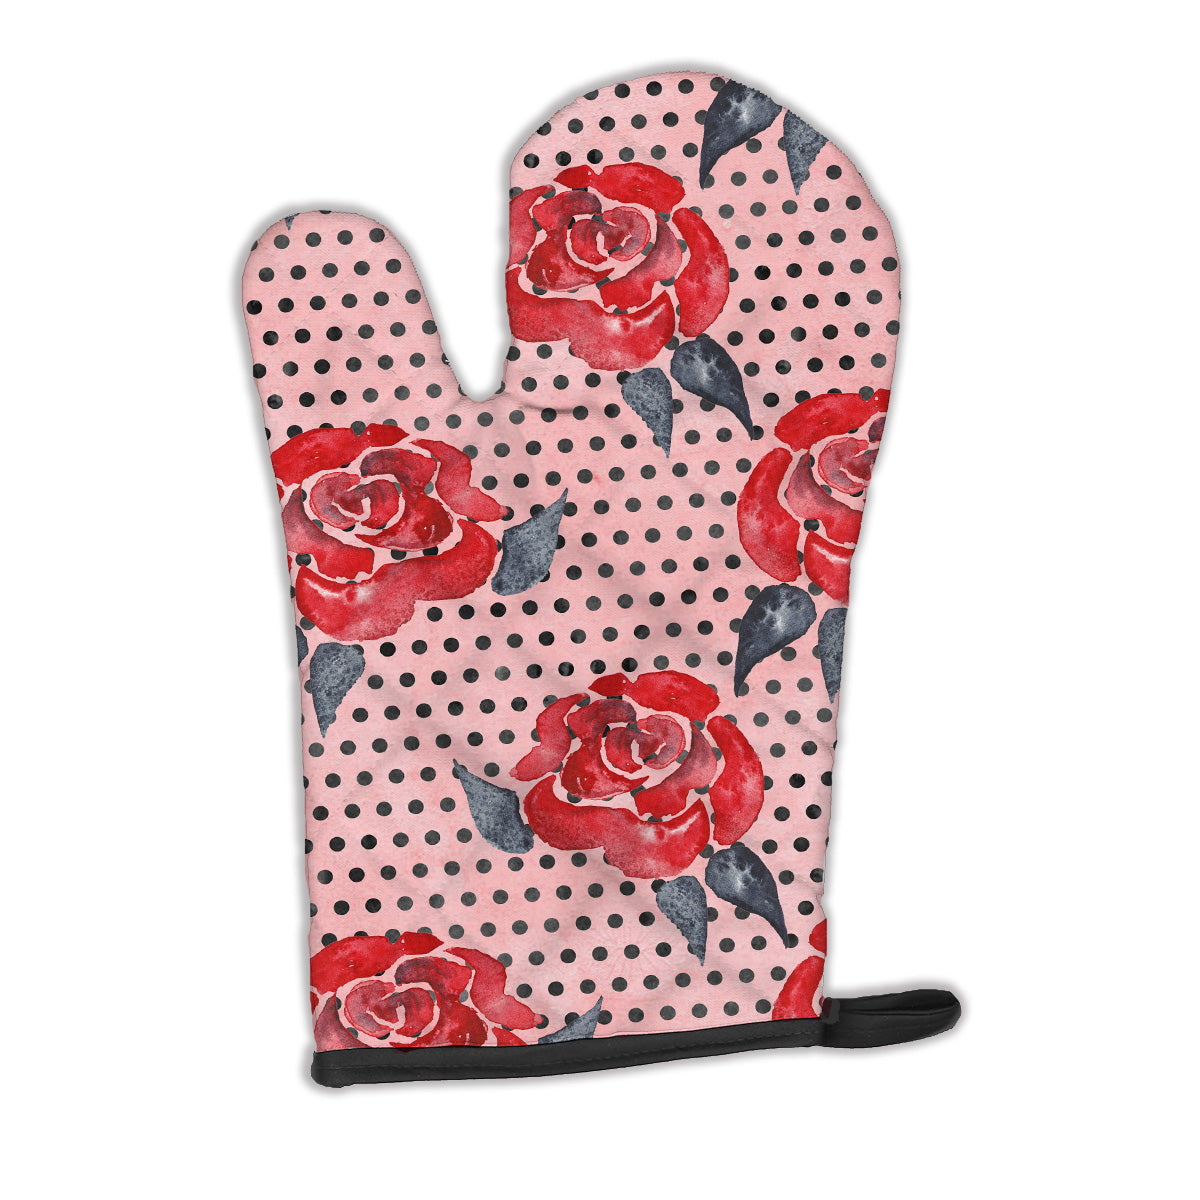 Watercolor Red Roses and Polkadots Oven Mitt BB7513OVMT